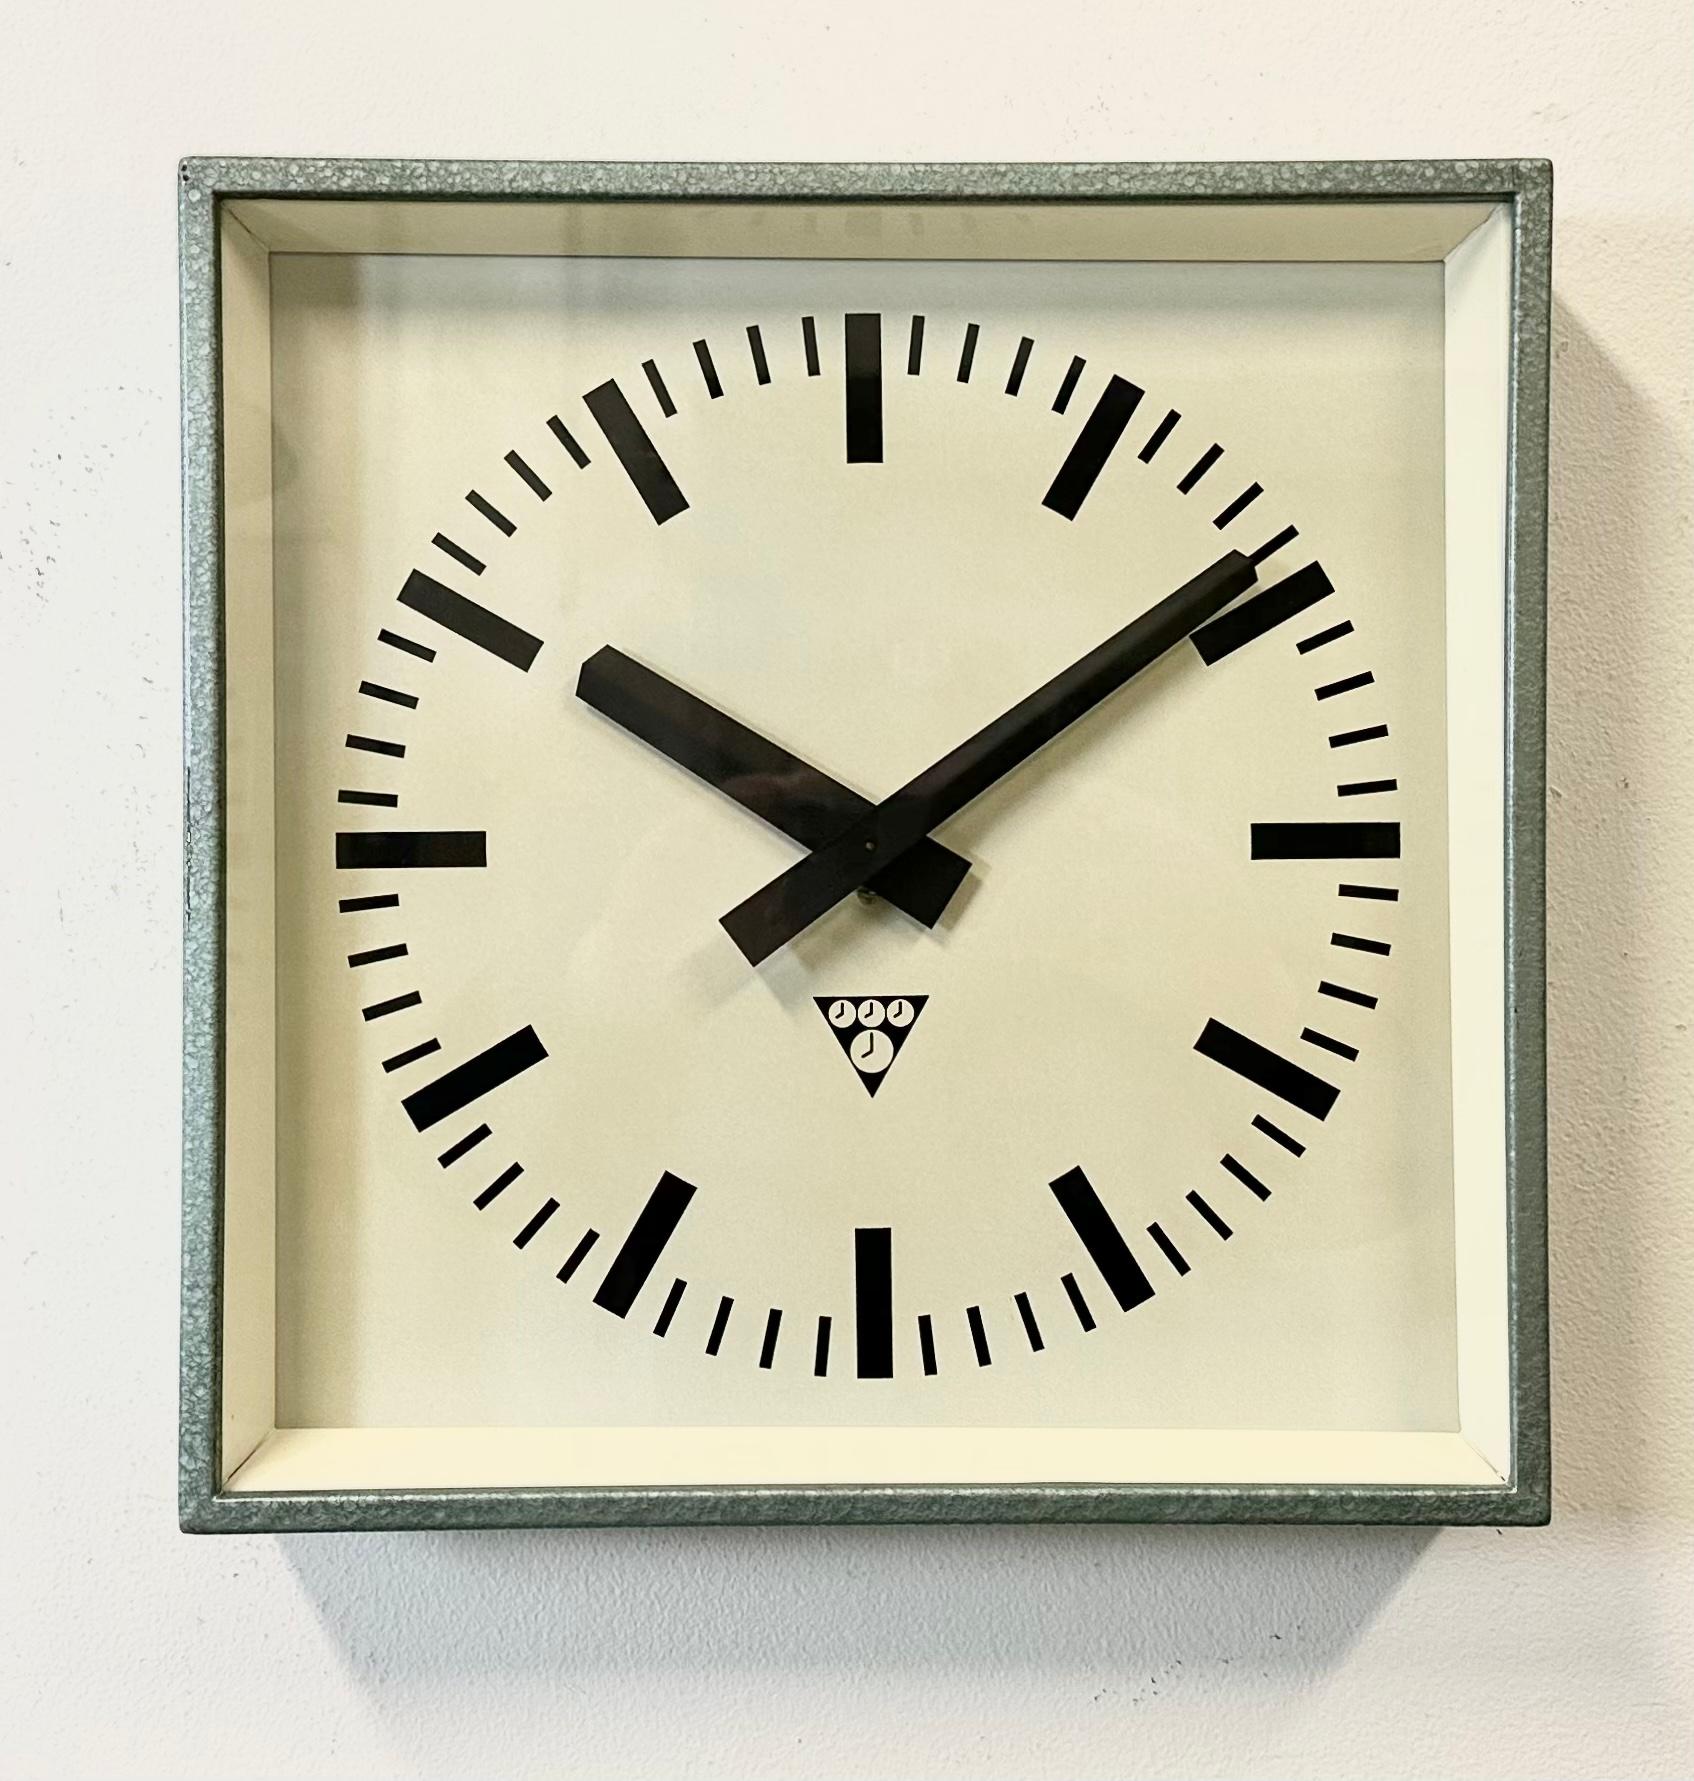 Czech Green Industrial Square Wall Clock from Pragotron, 1970s For Sale